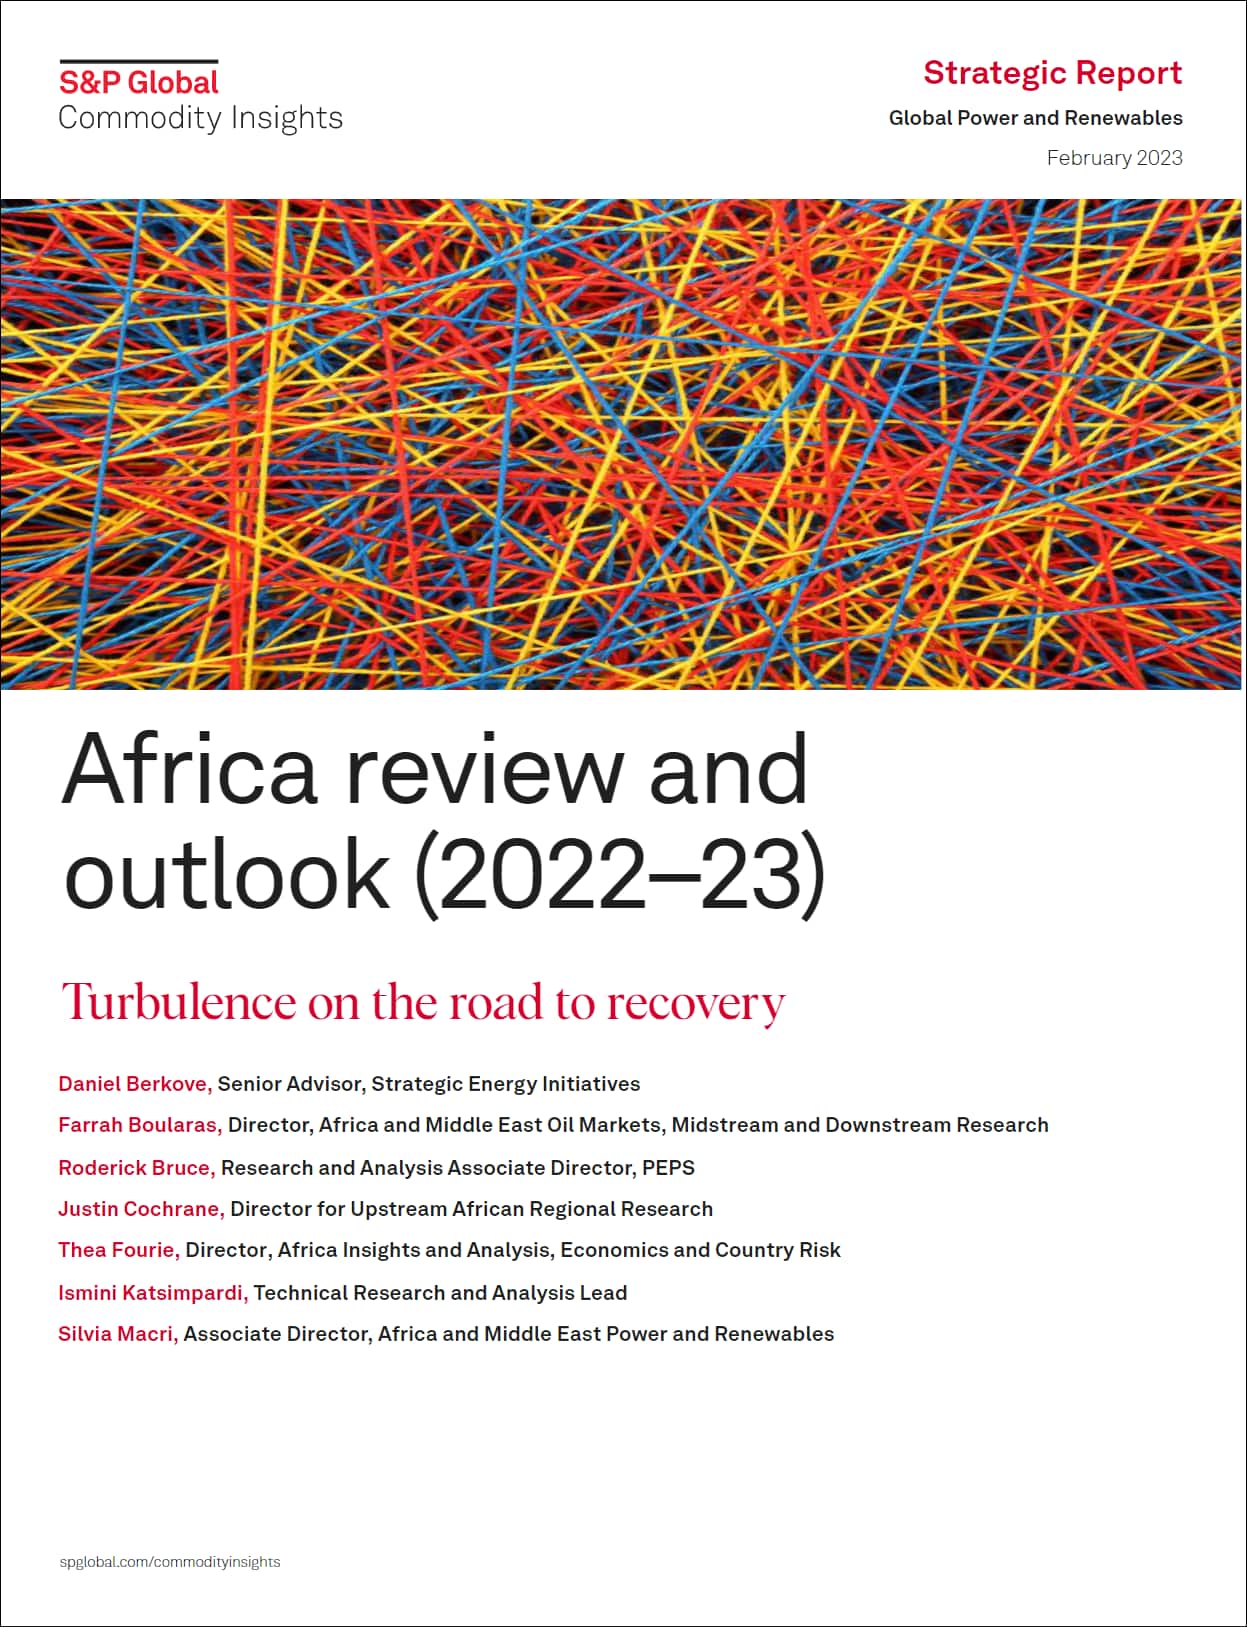 Africa review and outlook (2022-23): Turbulence on the road to recovery